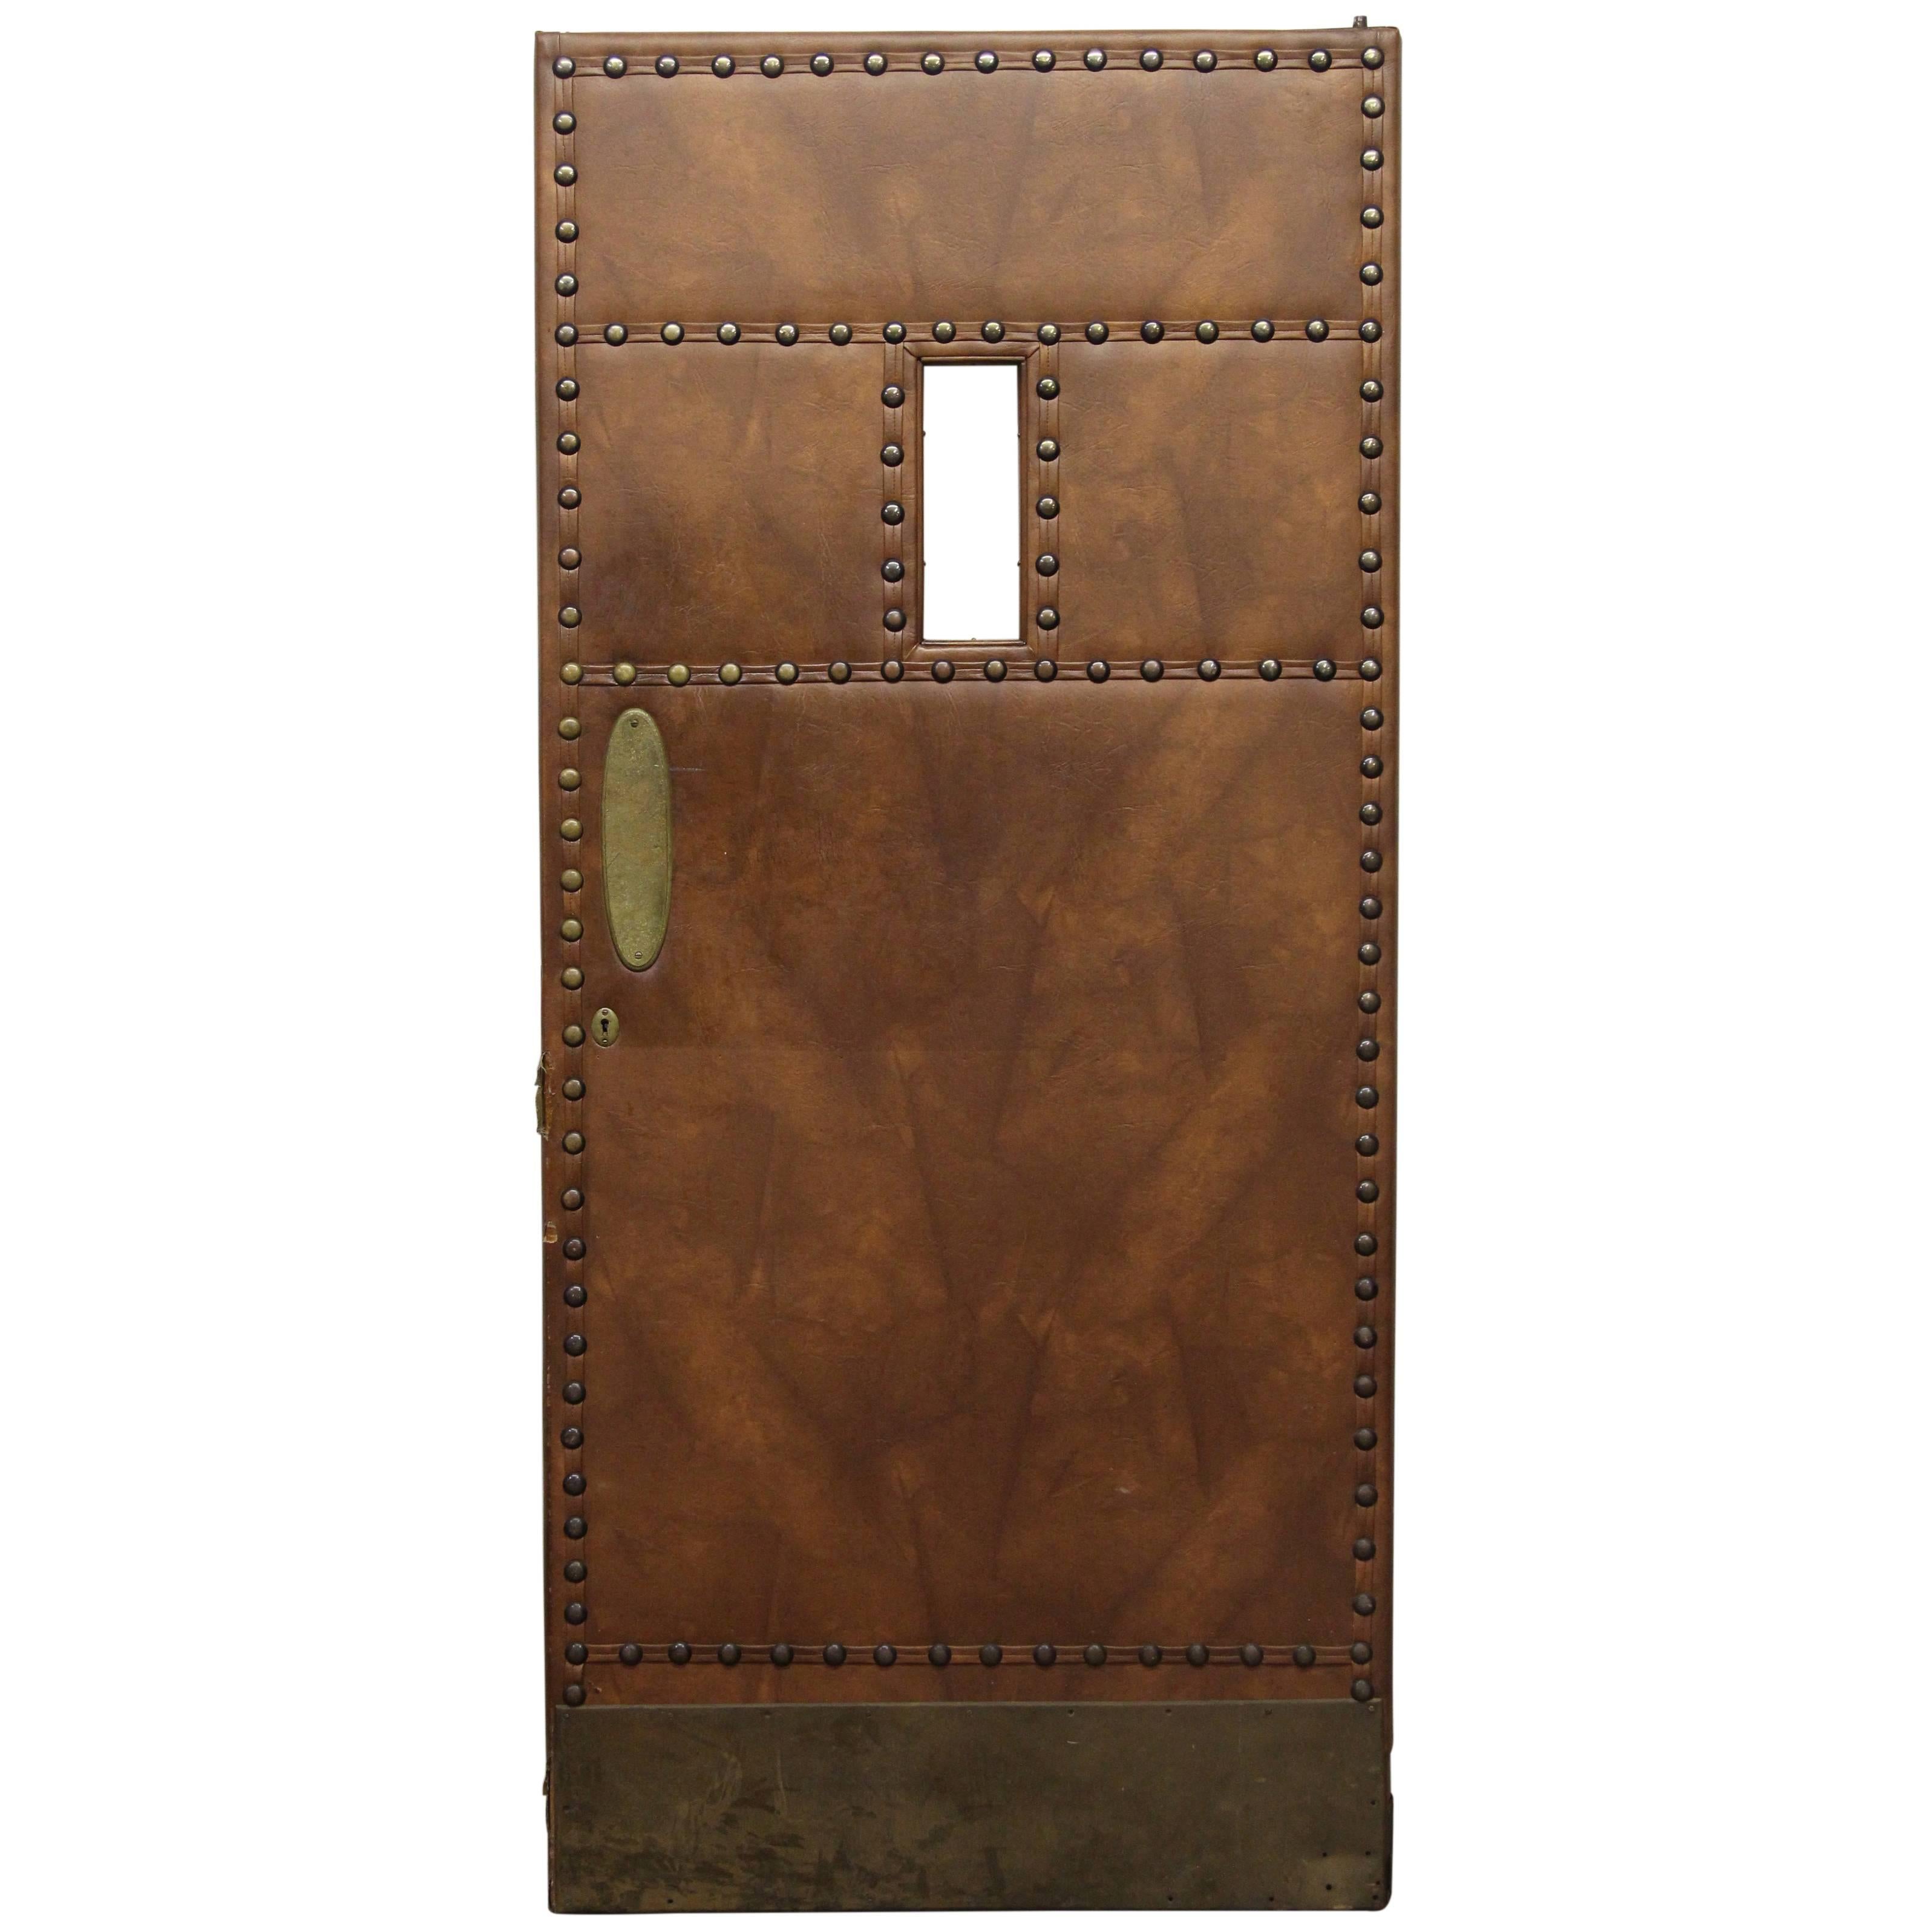 1940s Leather like Studded Swinging Door with Original Hardware and Window